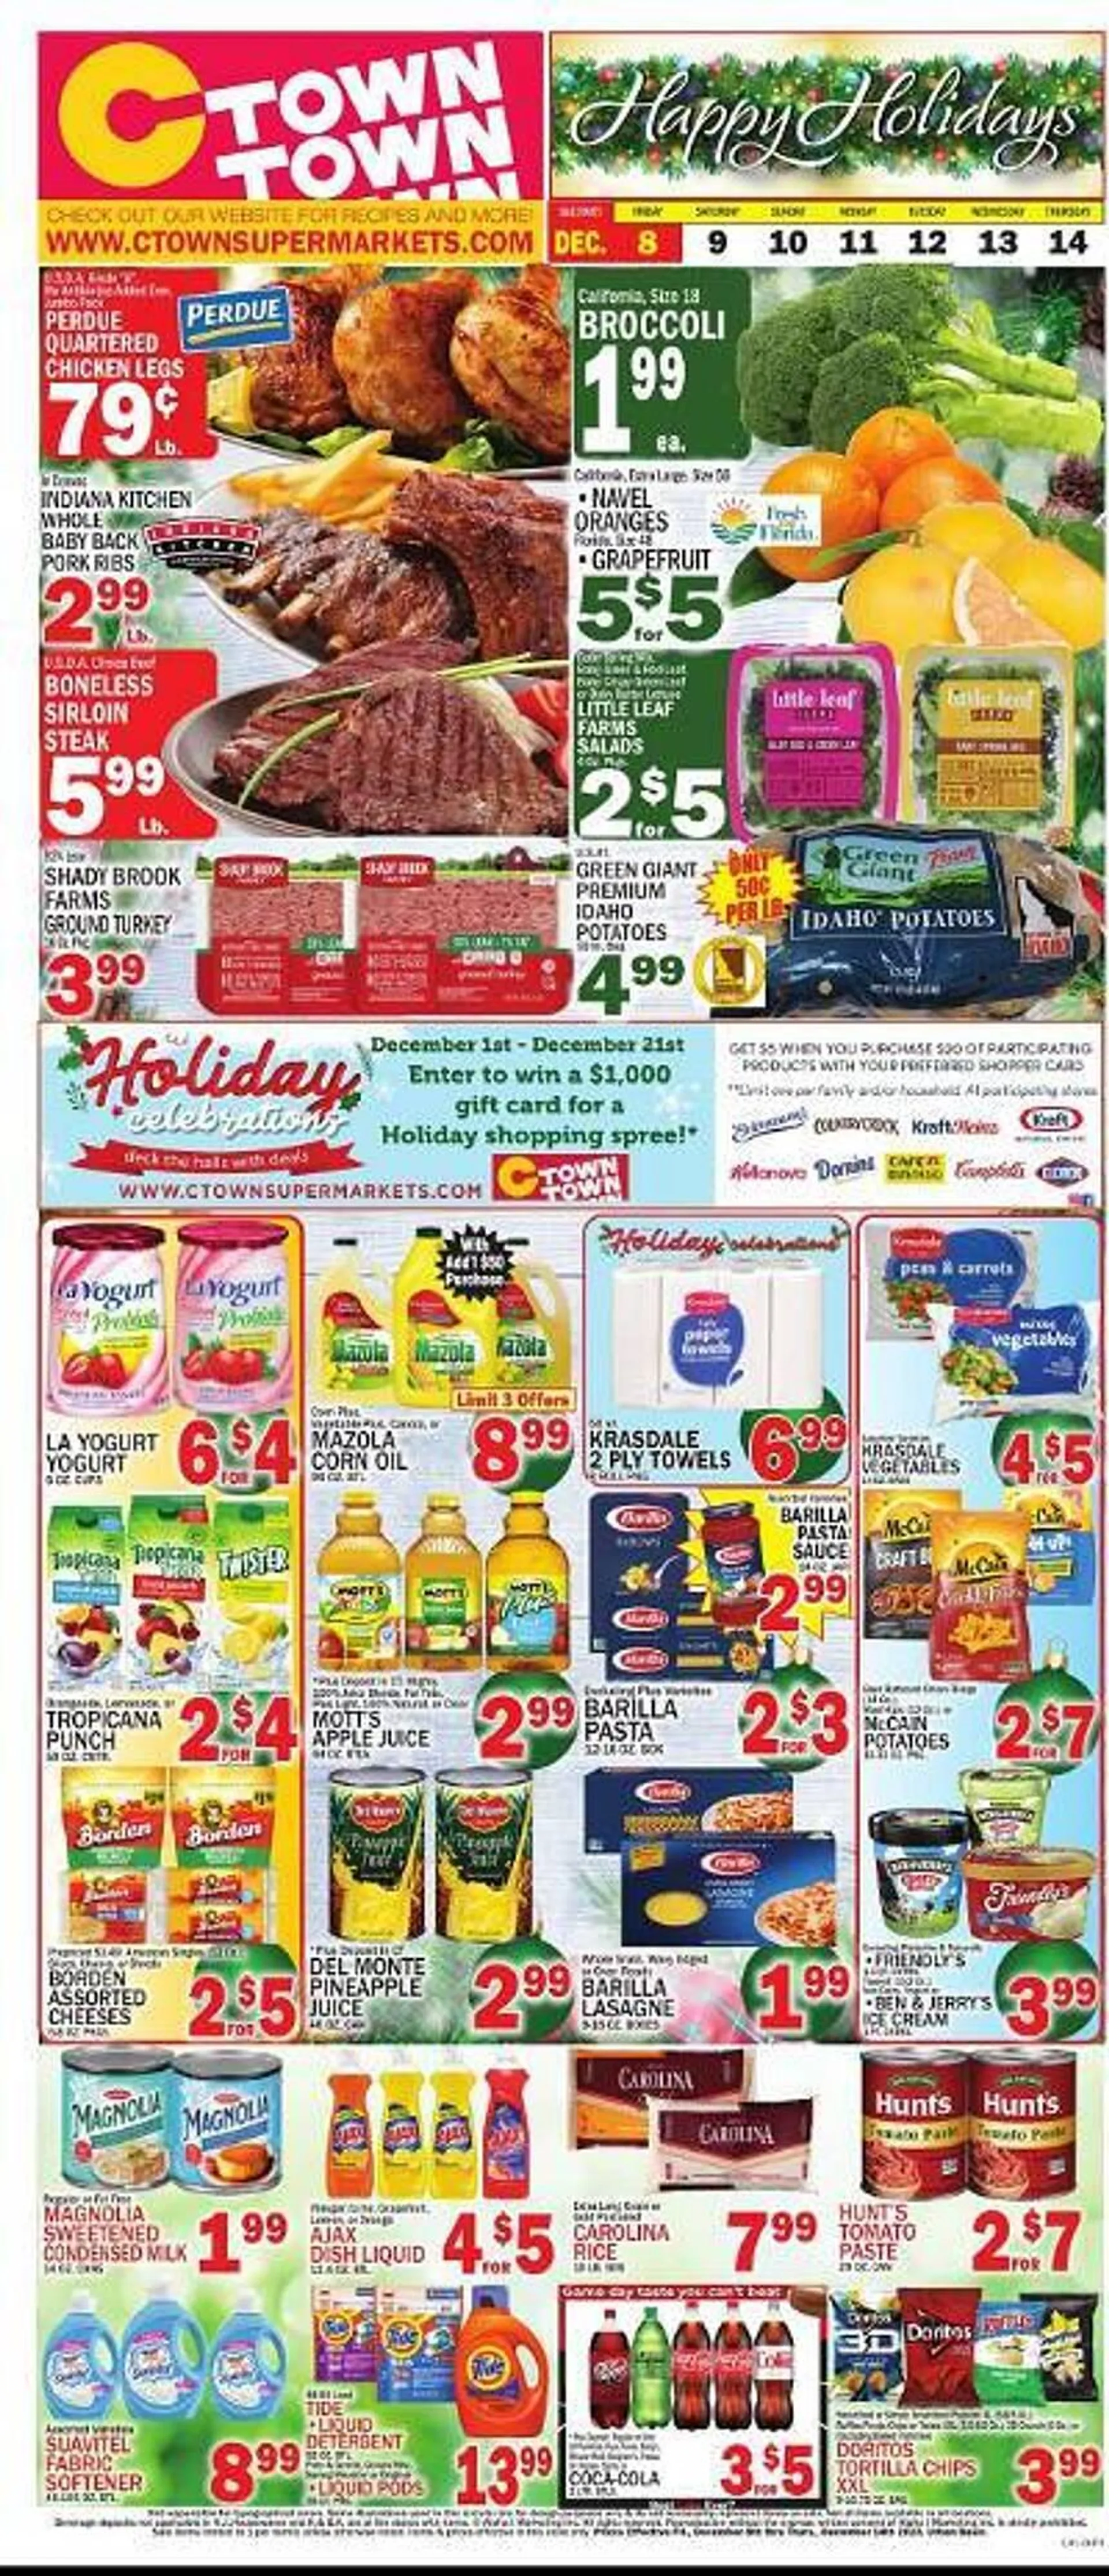 Ctown Weekly Ad - 3